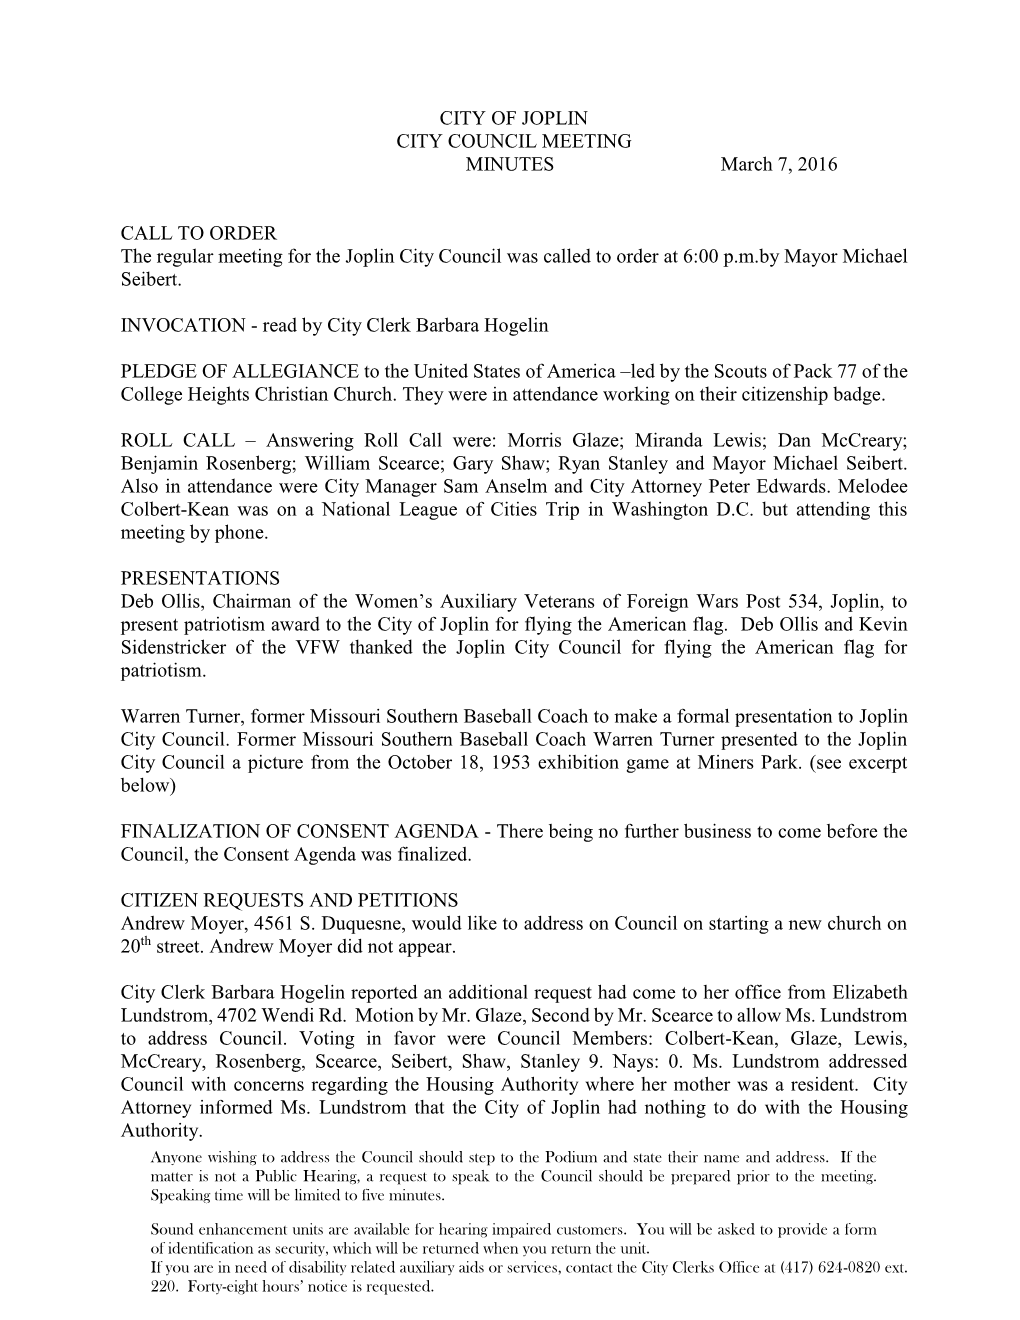 CITY of JOPLIN CITY COUNCIL MEETING MINUTES March 7, 2016